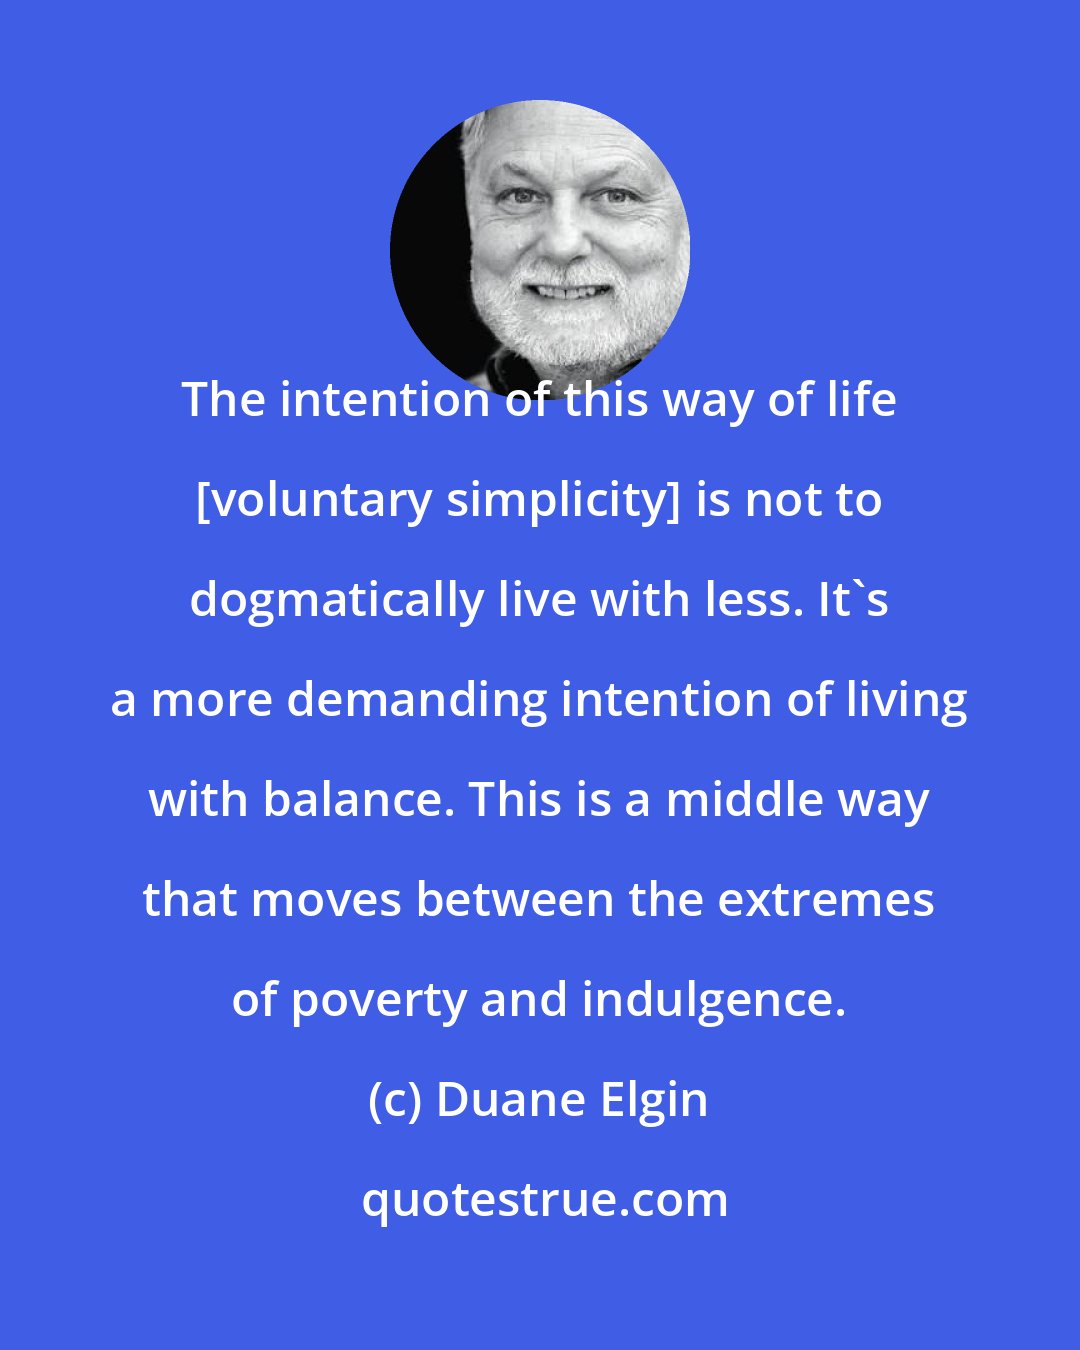 Duane Elgin: The intention of this way of life [voluntary simplicity] is not to dogmatically live with less. It's a more demanding intention of living with balance. This is a middle way that moves between the extremes of poverty and indulgence.